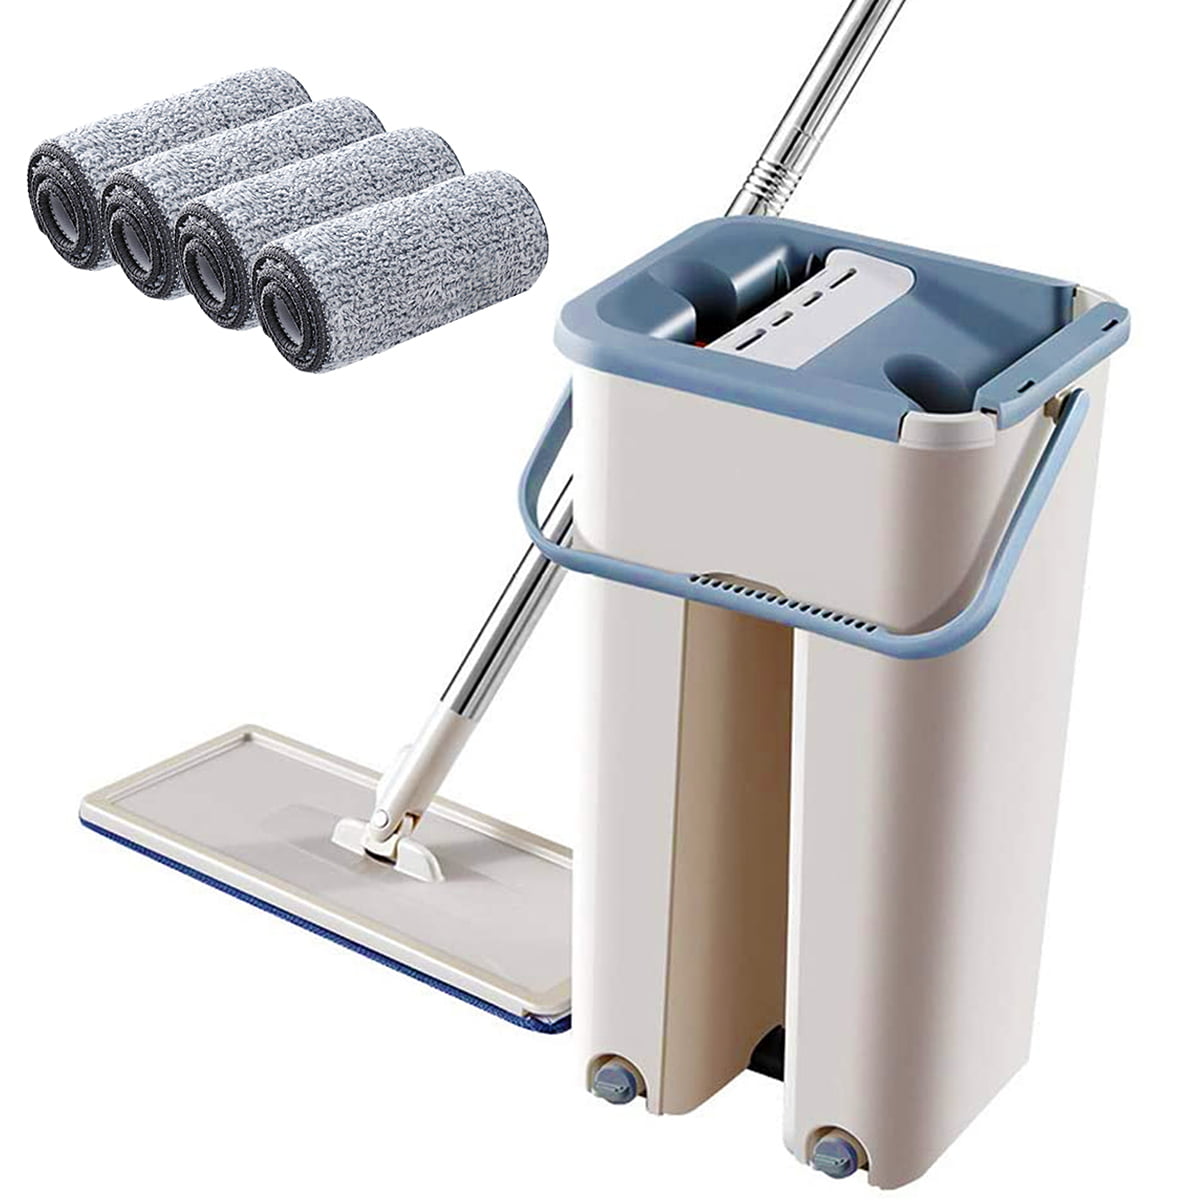 SYR Flat Mop 4 Way Fold Down Mop Handle With Reusable Microfibre Head BLUE CODE 